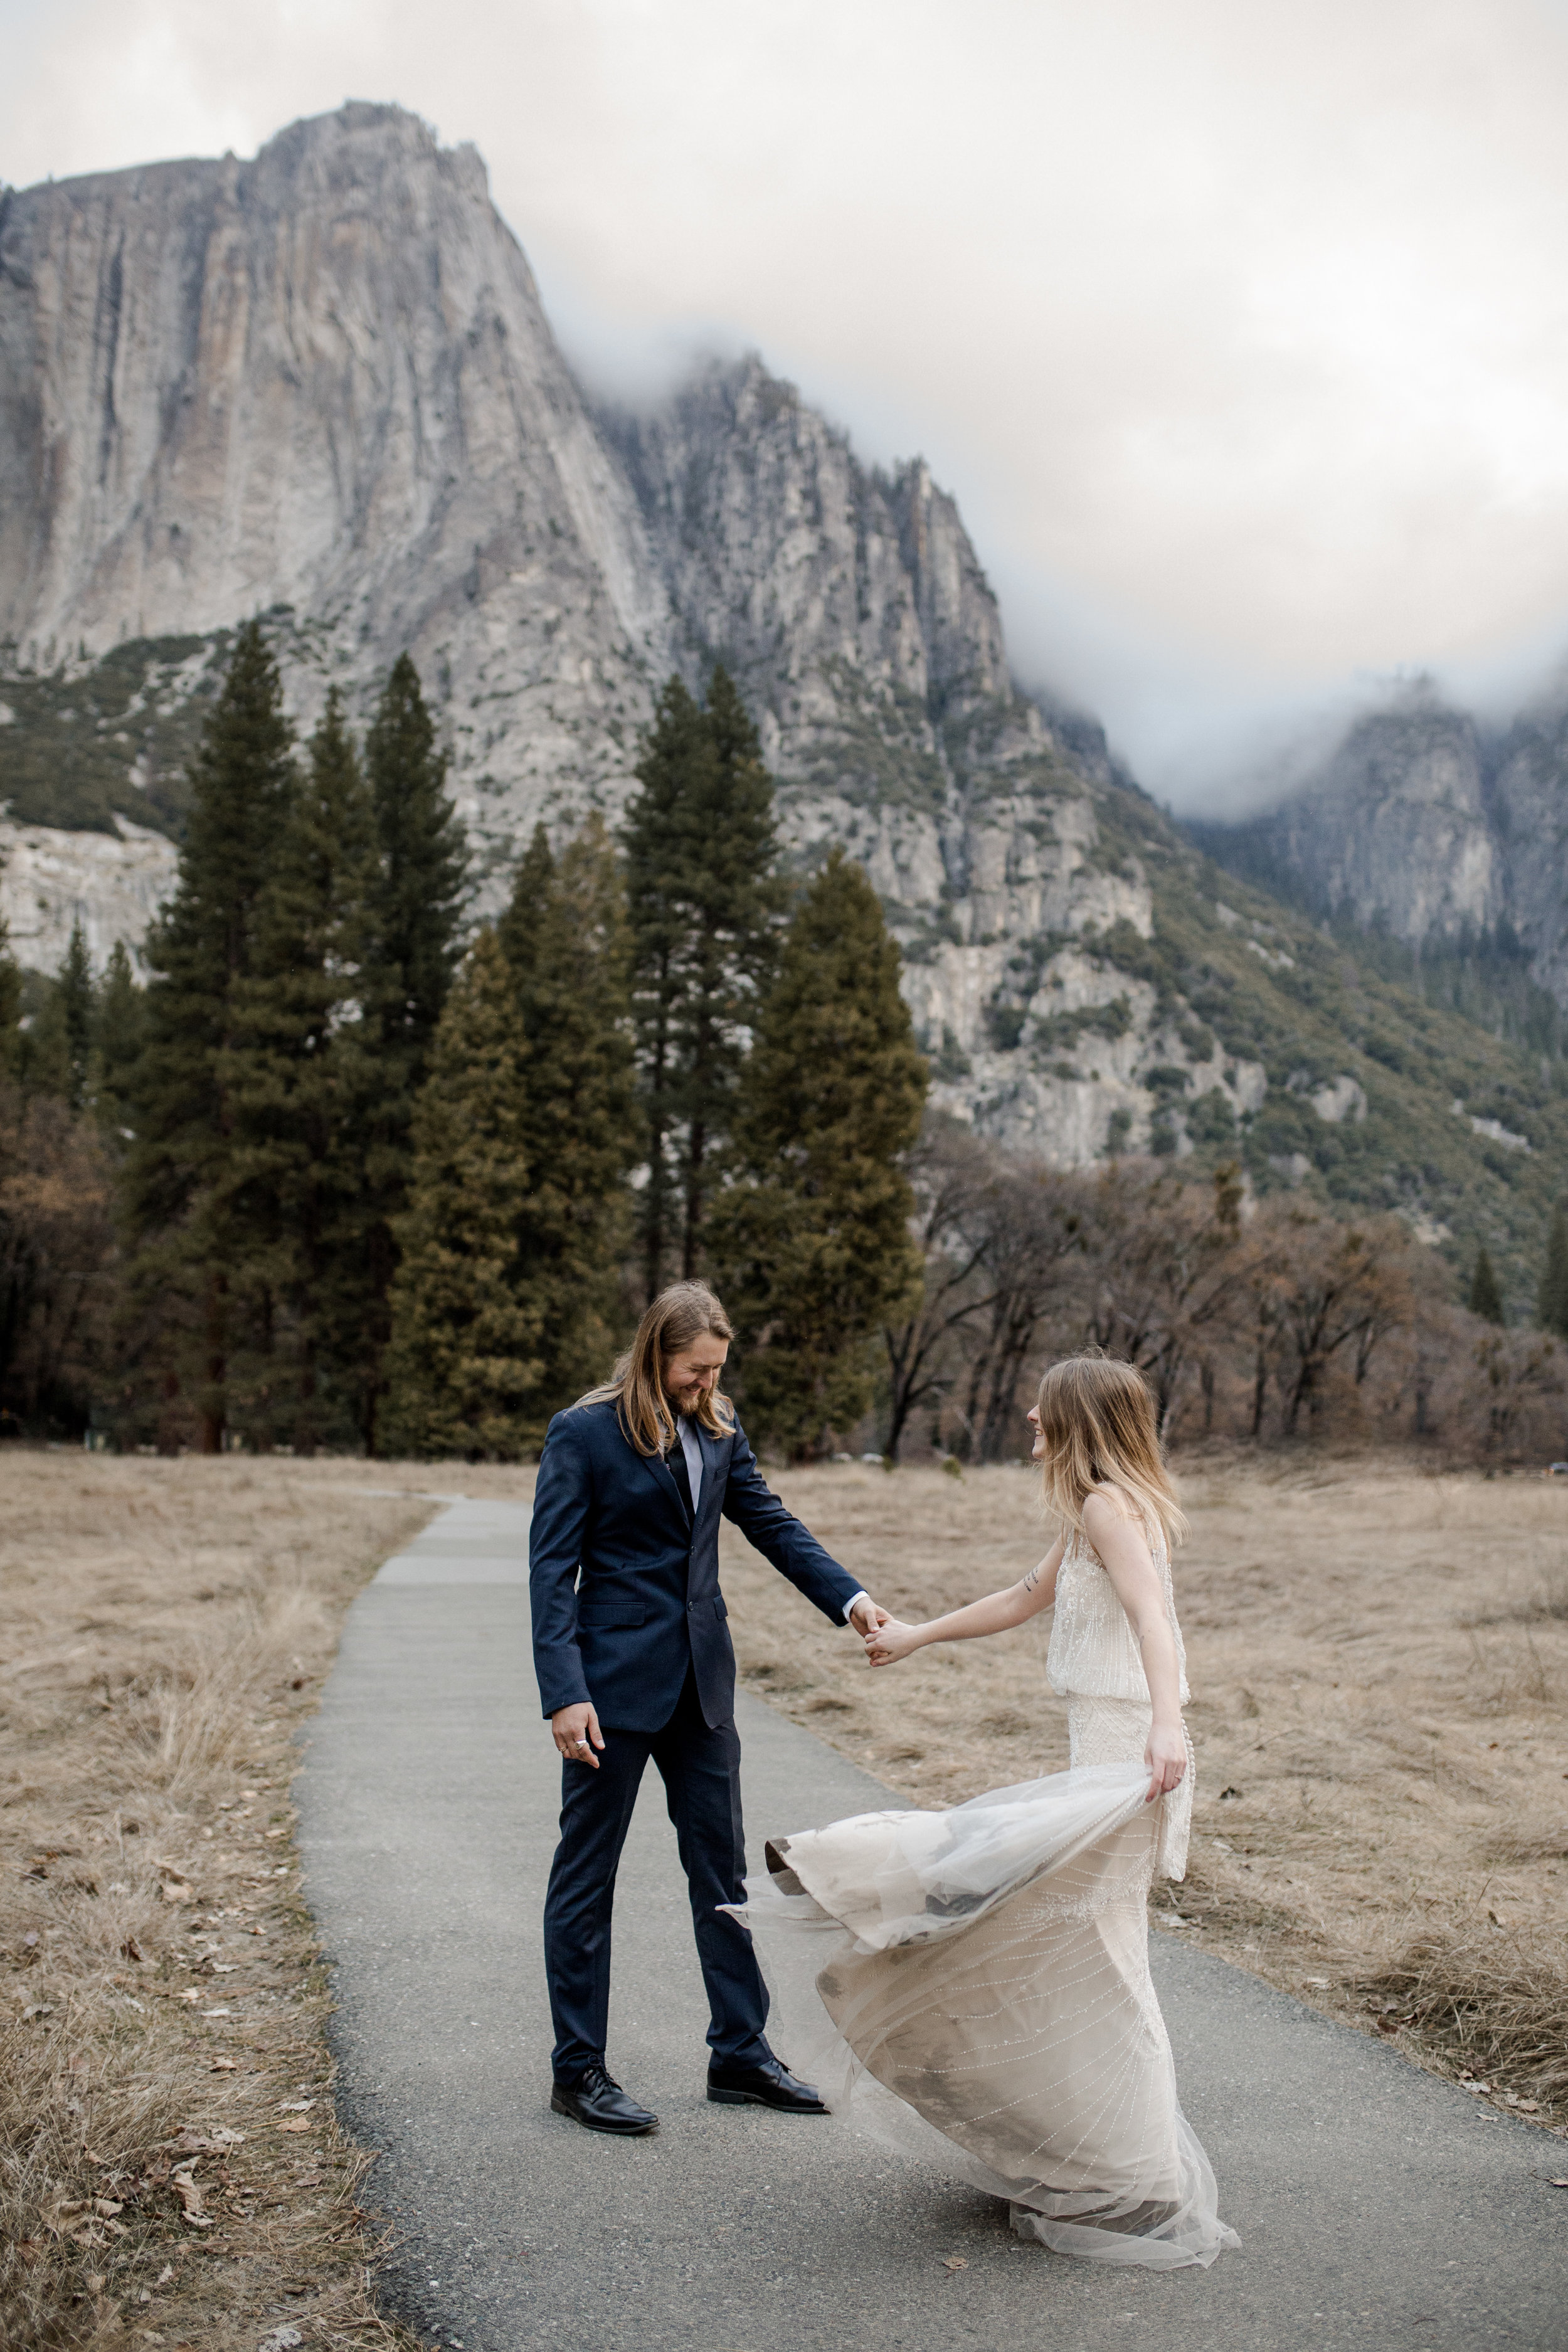 nicole-daacke-photography-yousemite-national-park-elopement-photographer-winter-cloud-moody-elope-inspiration-yosemite-valley-tunnel-view-winter-cloud-fog-weather-wedding-photos-26.jpg